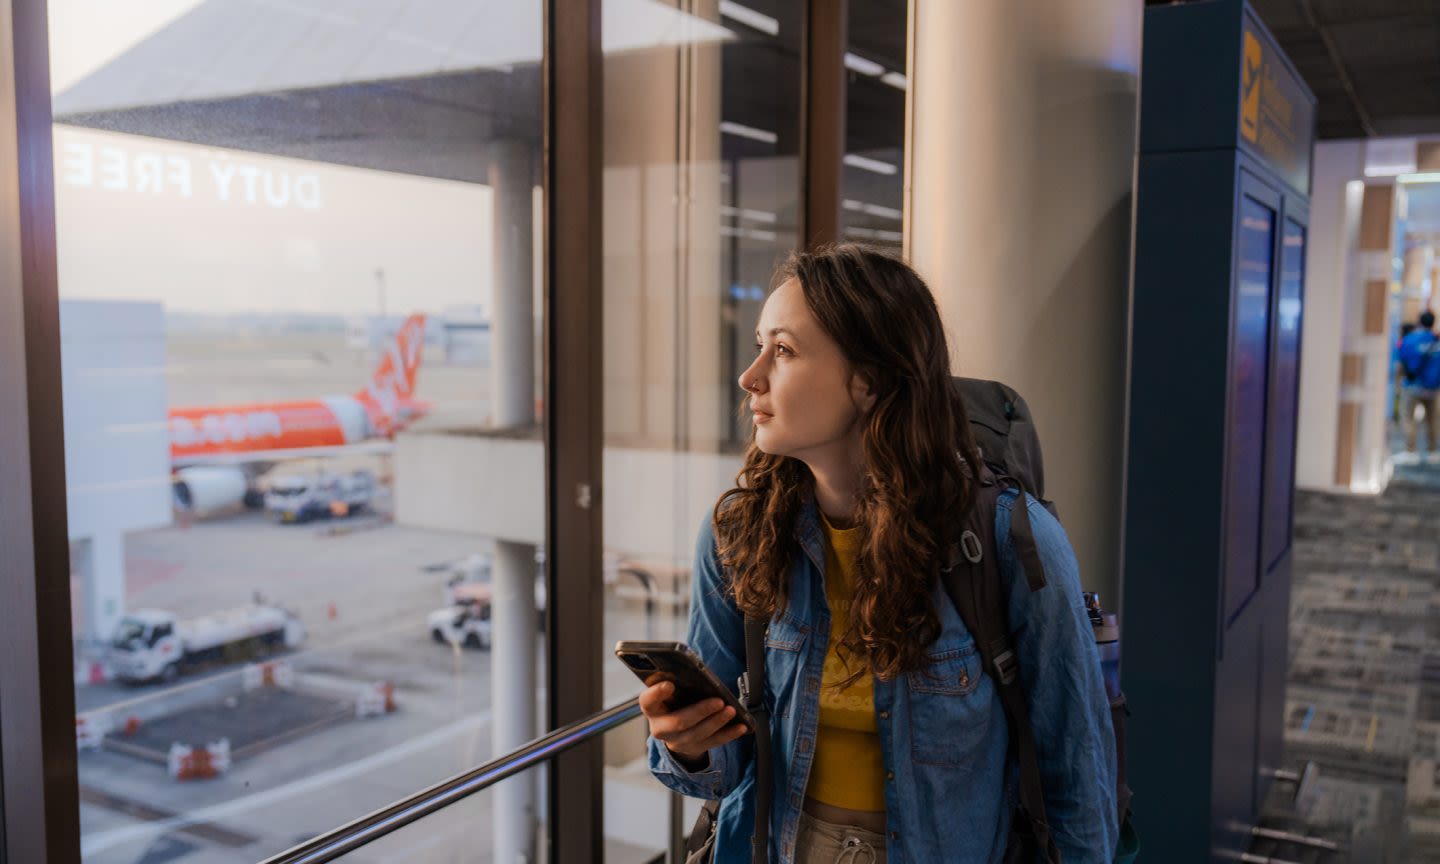 Alternative Airlines: A Smart Way to Pay for Travel? - NerdWallet